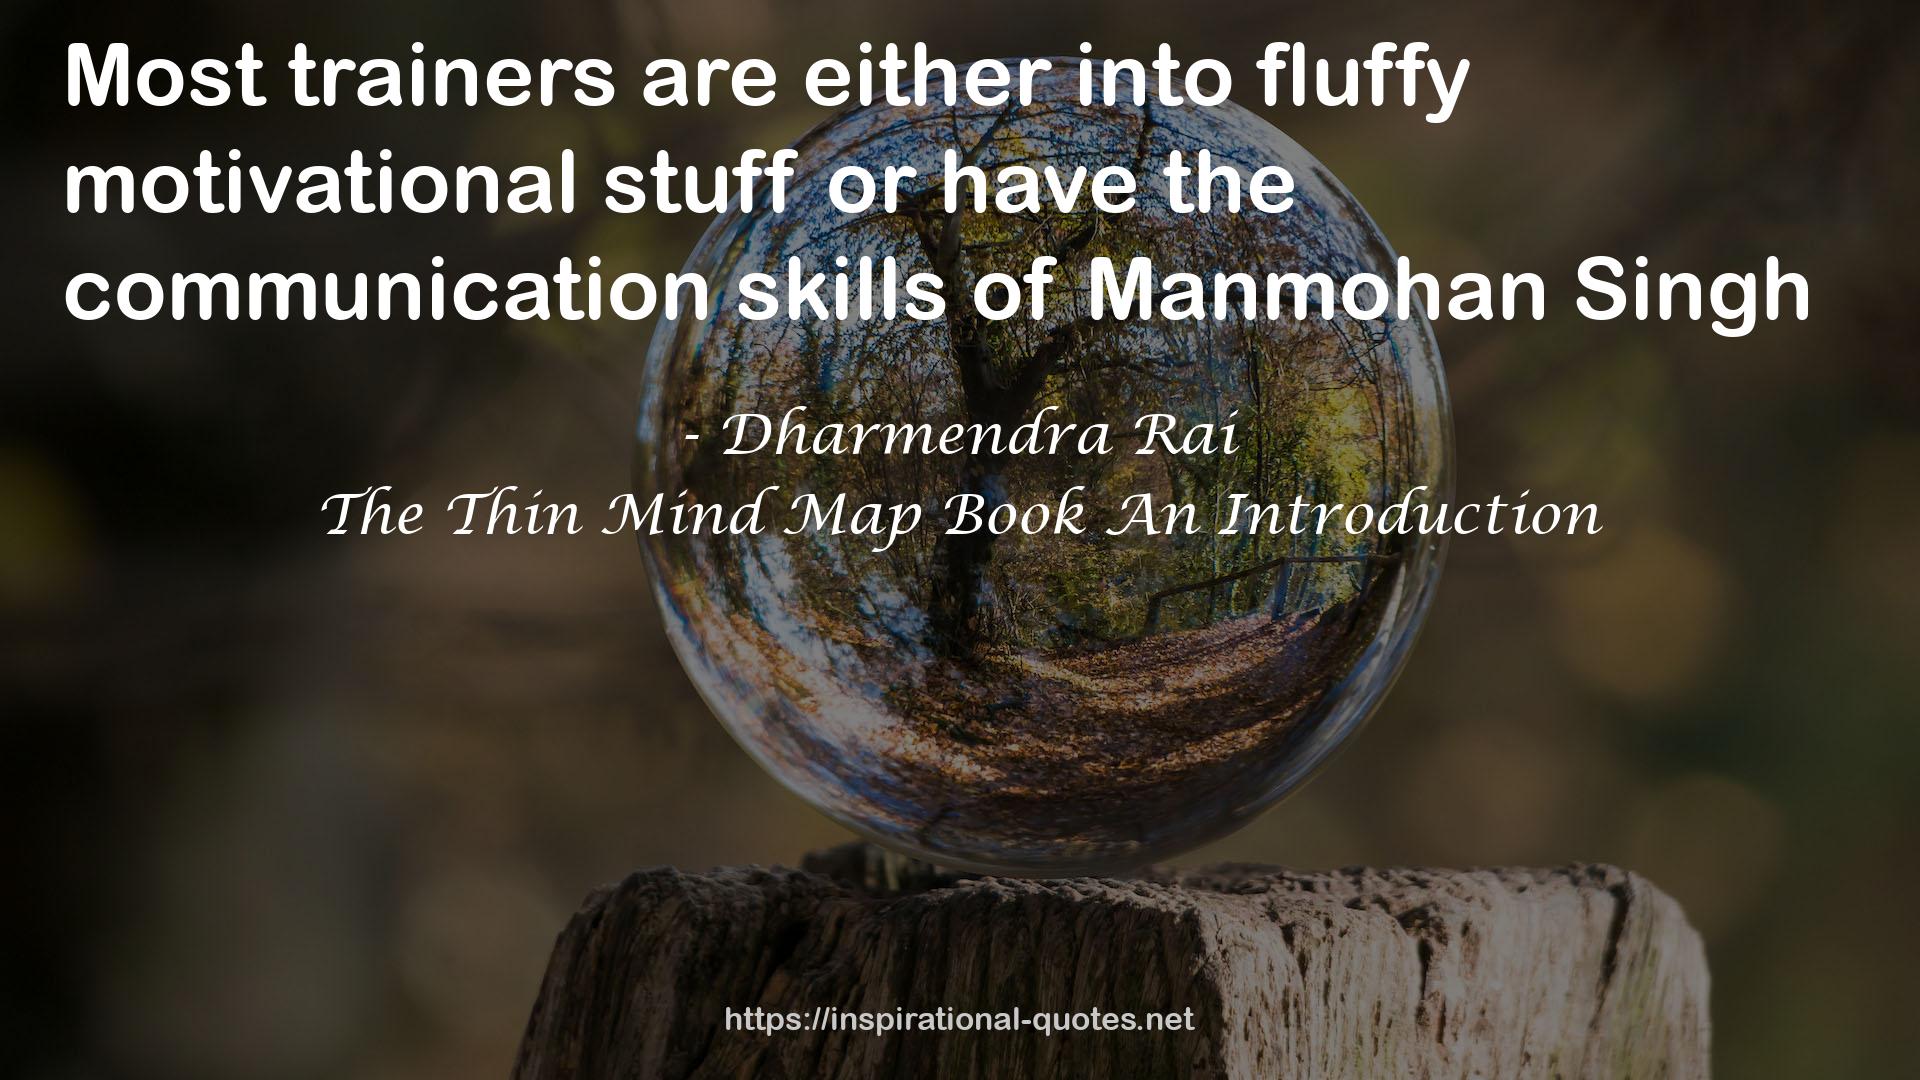 The Thin Mind Map Book An Introduction QUOTES